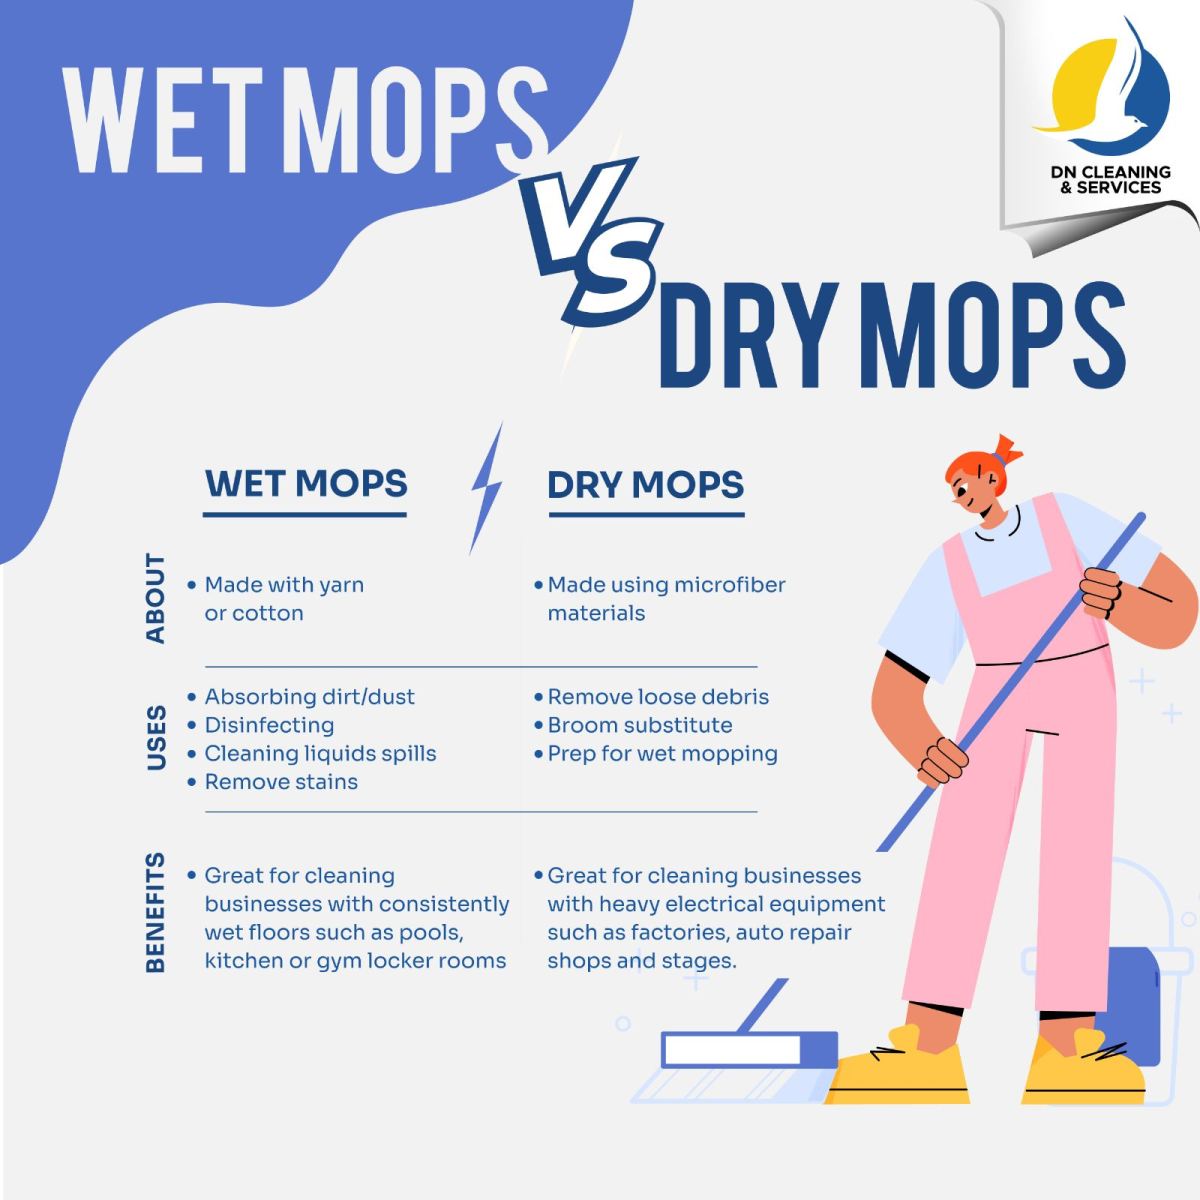 Differences Between Dry Mop and Wet Mop